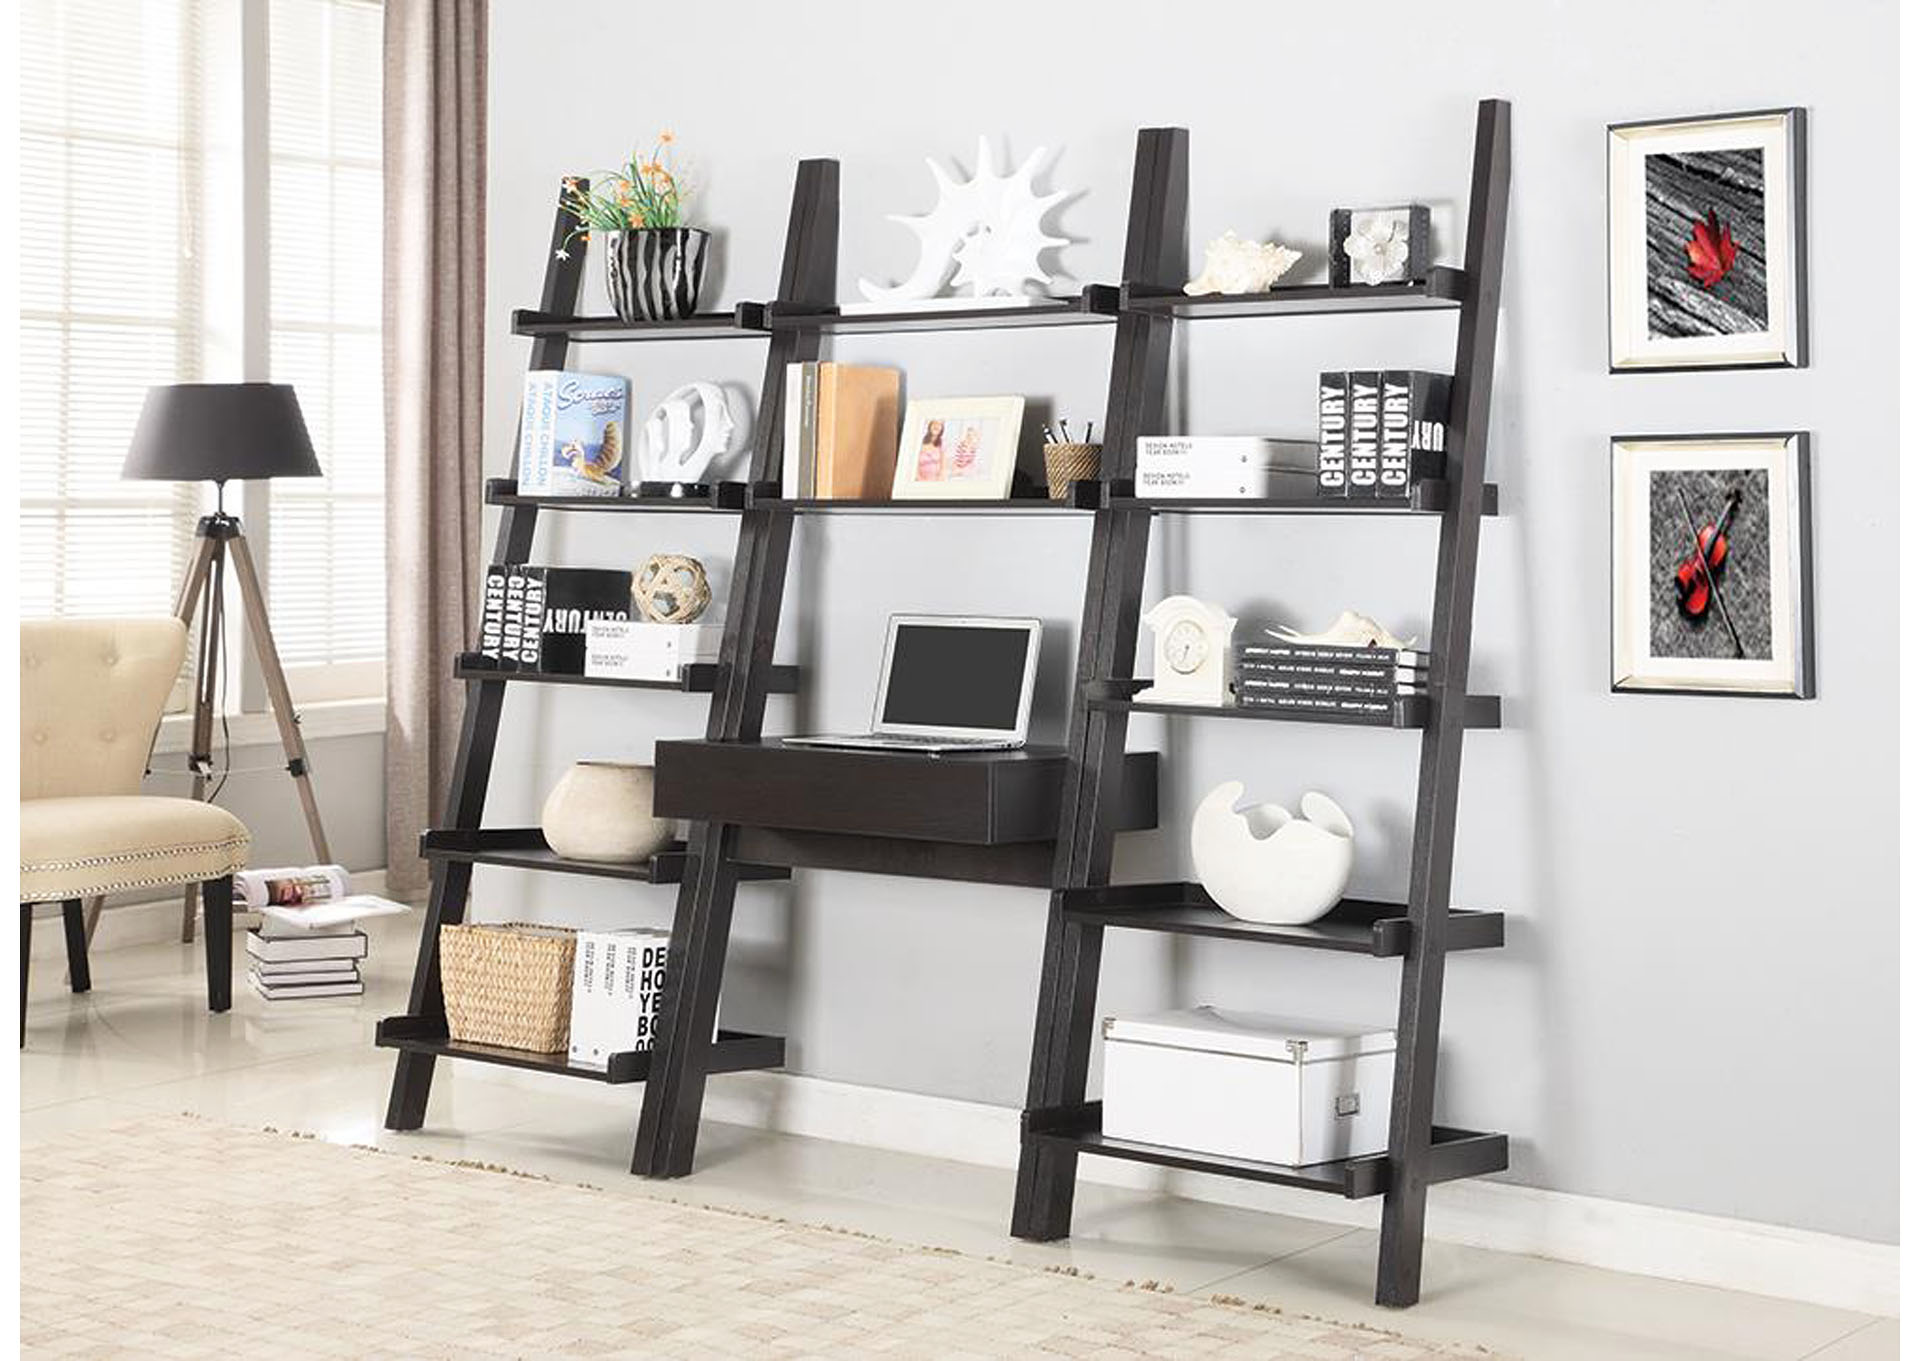 Tallahassee Discount Furniture Tallahassee Fl Cappuccino Bookcase